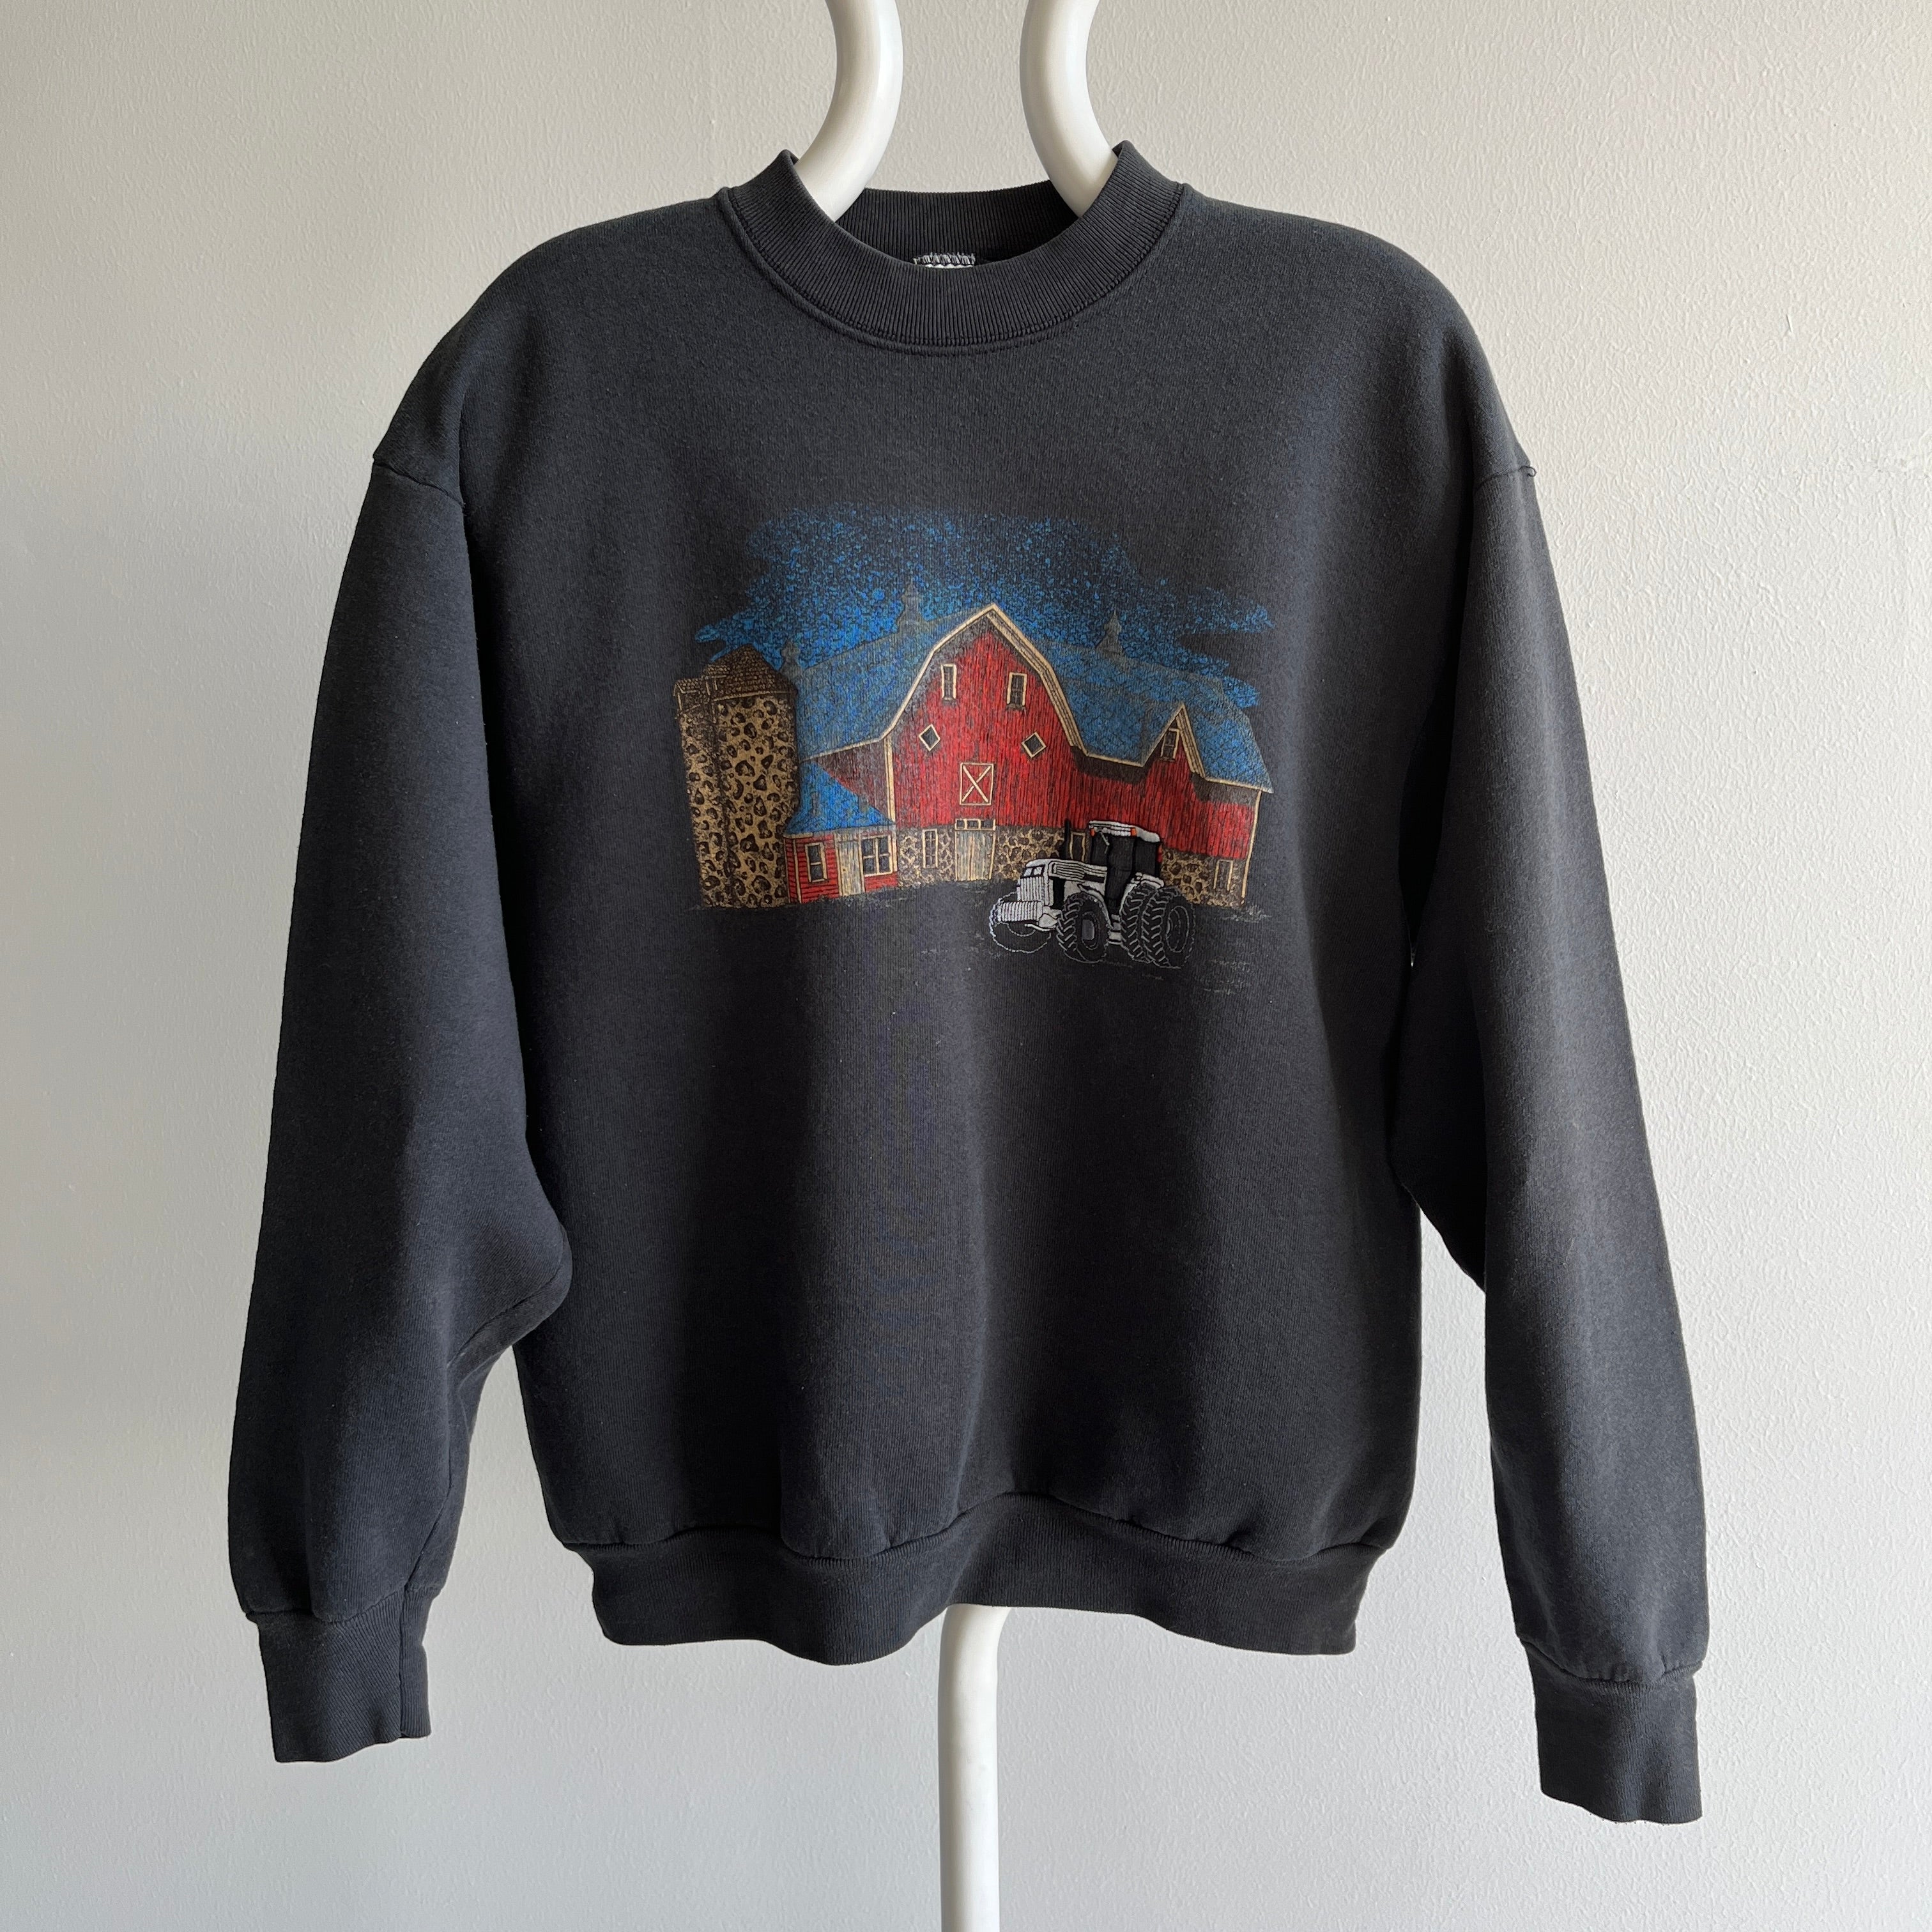 1989 (?) Embroidered Tractor on Screen Printed Barn Sweatshirt - THIS